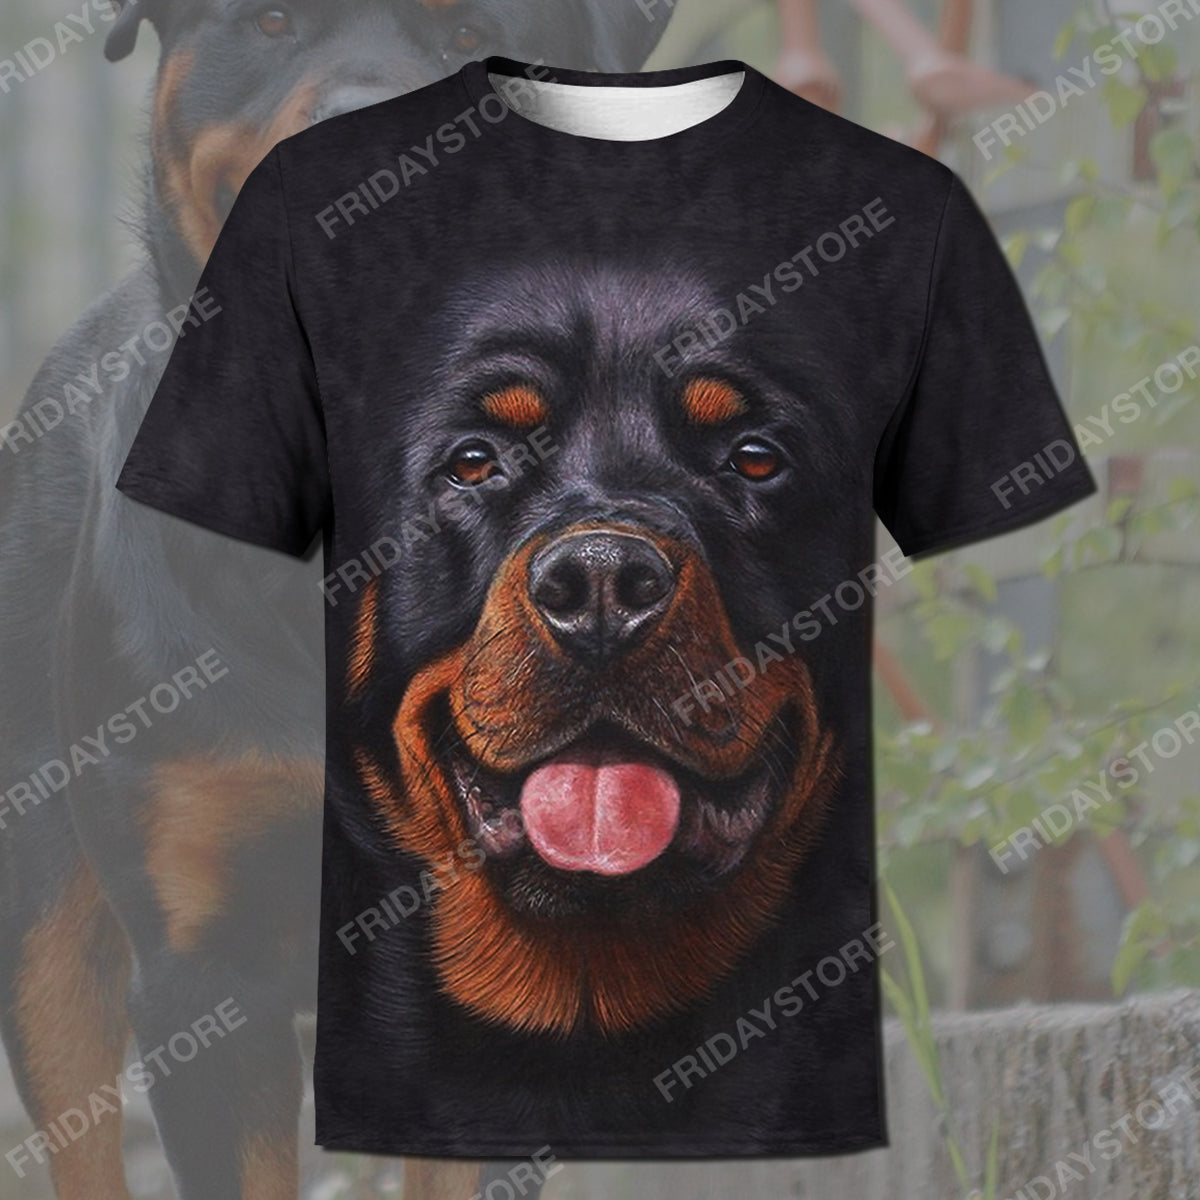 Unifinz Dog Hoodie Rottweiler Hoodie Rottweiler Dog Graphic T Shirt Awesome Dog Shirt Sweater Tank Apparel For Dog Lovers 2025